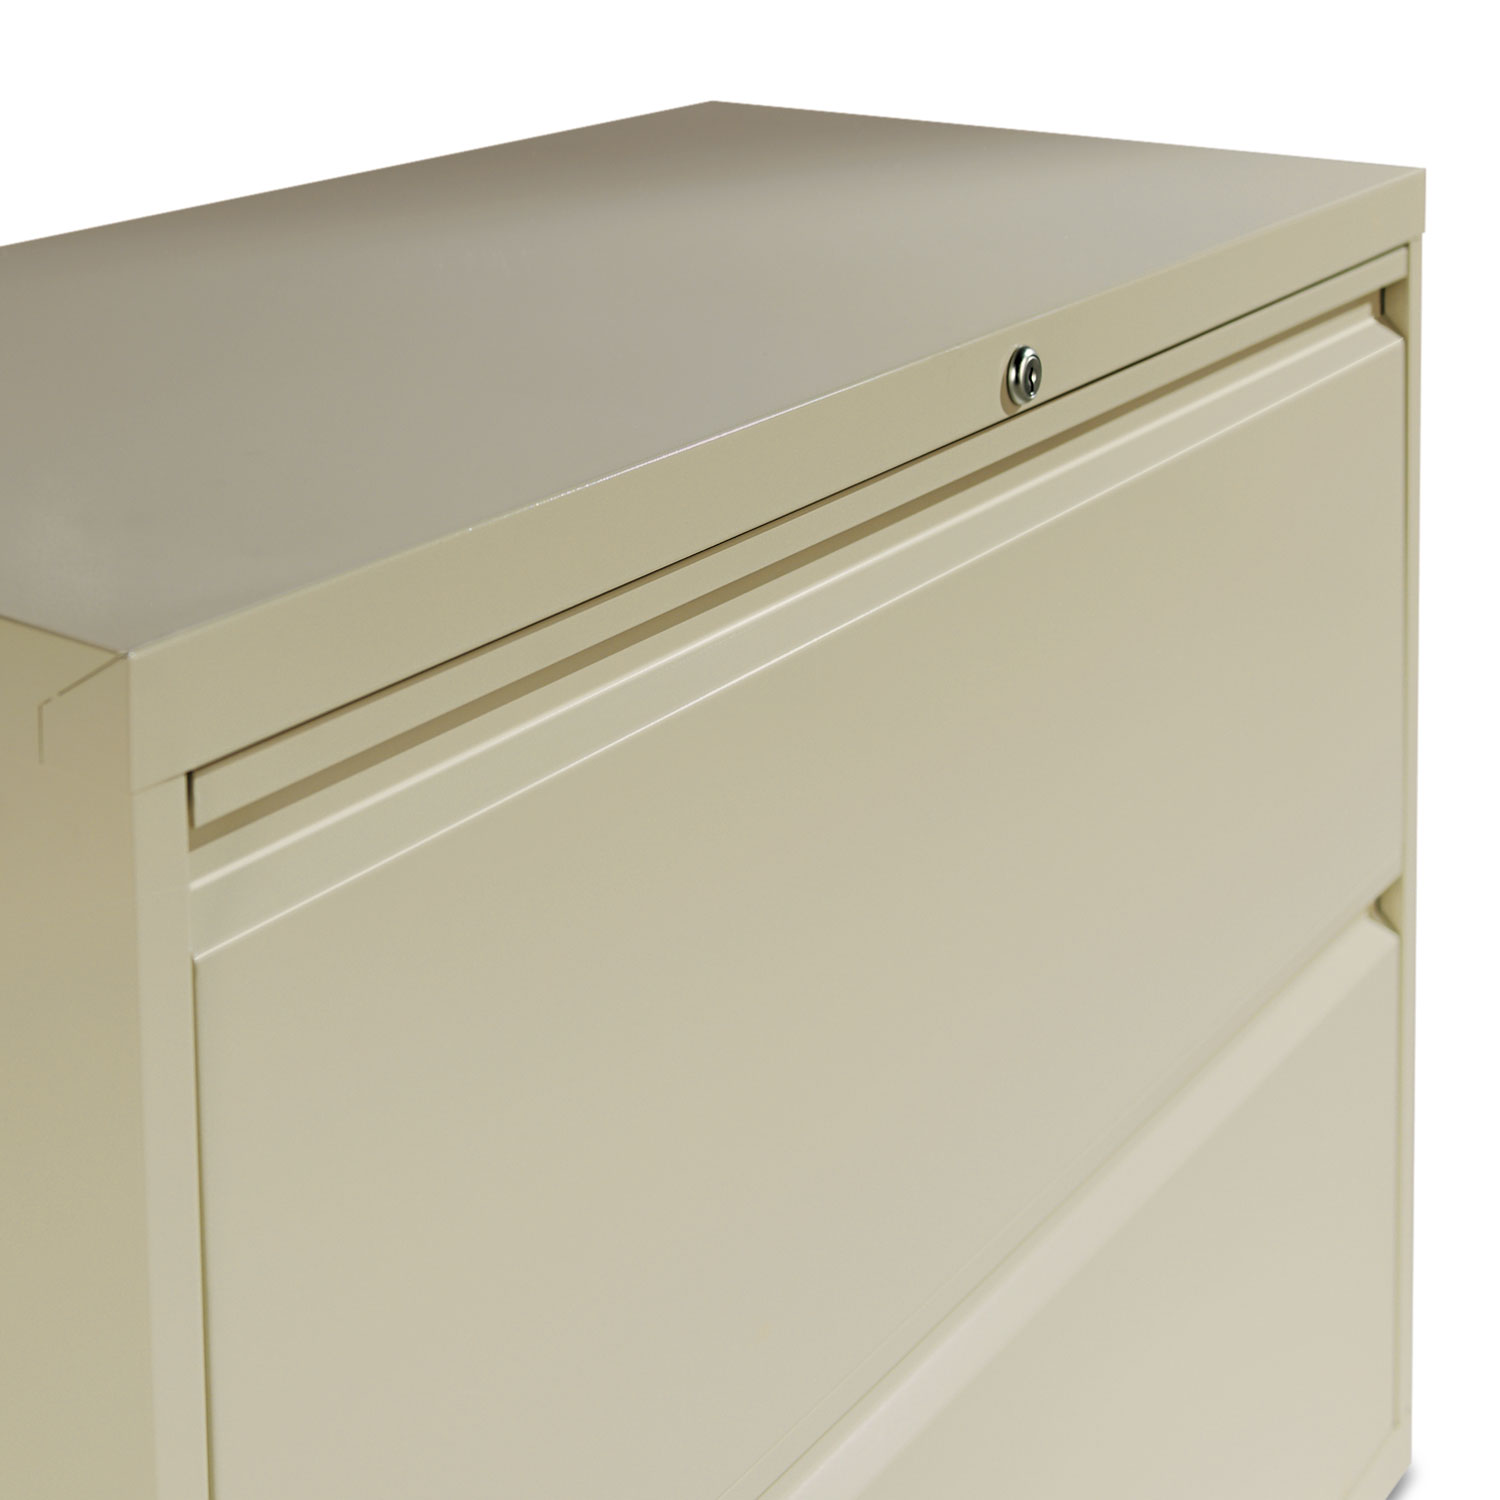 Two-Drawer Lateral File Cabinet, 36w x 19-1/4d x 28-3/8h, Putty